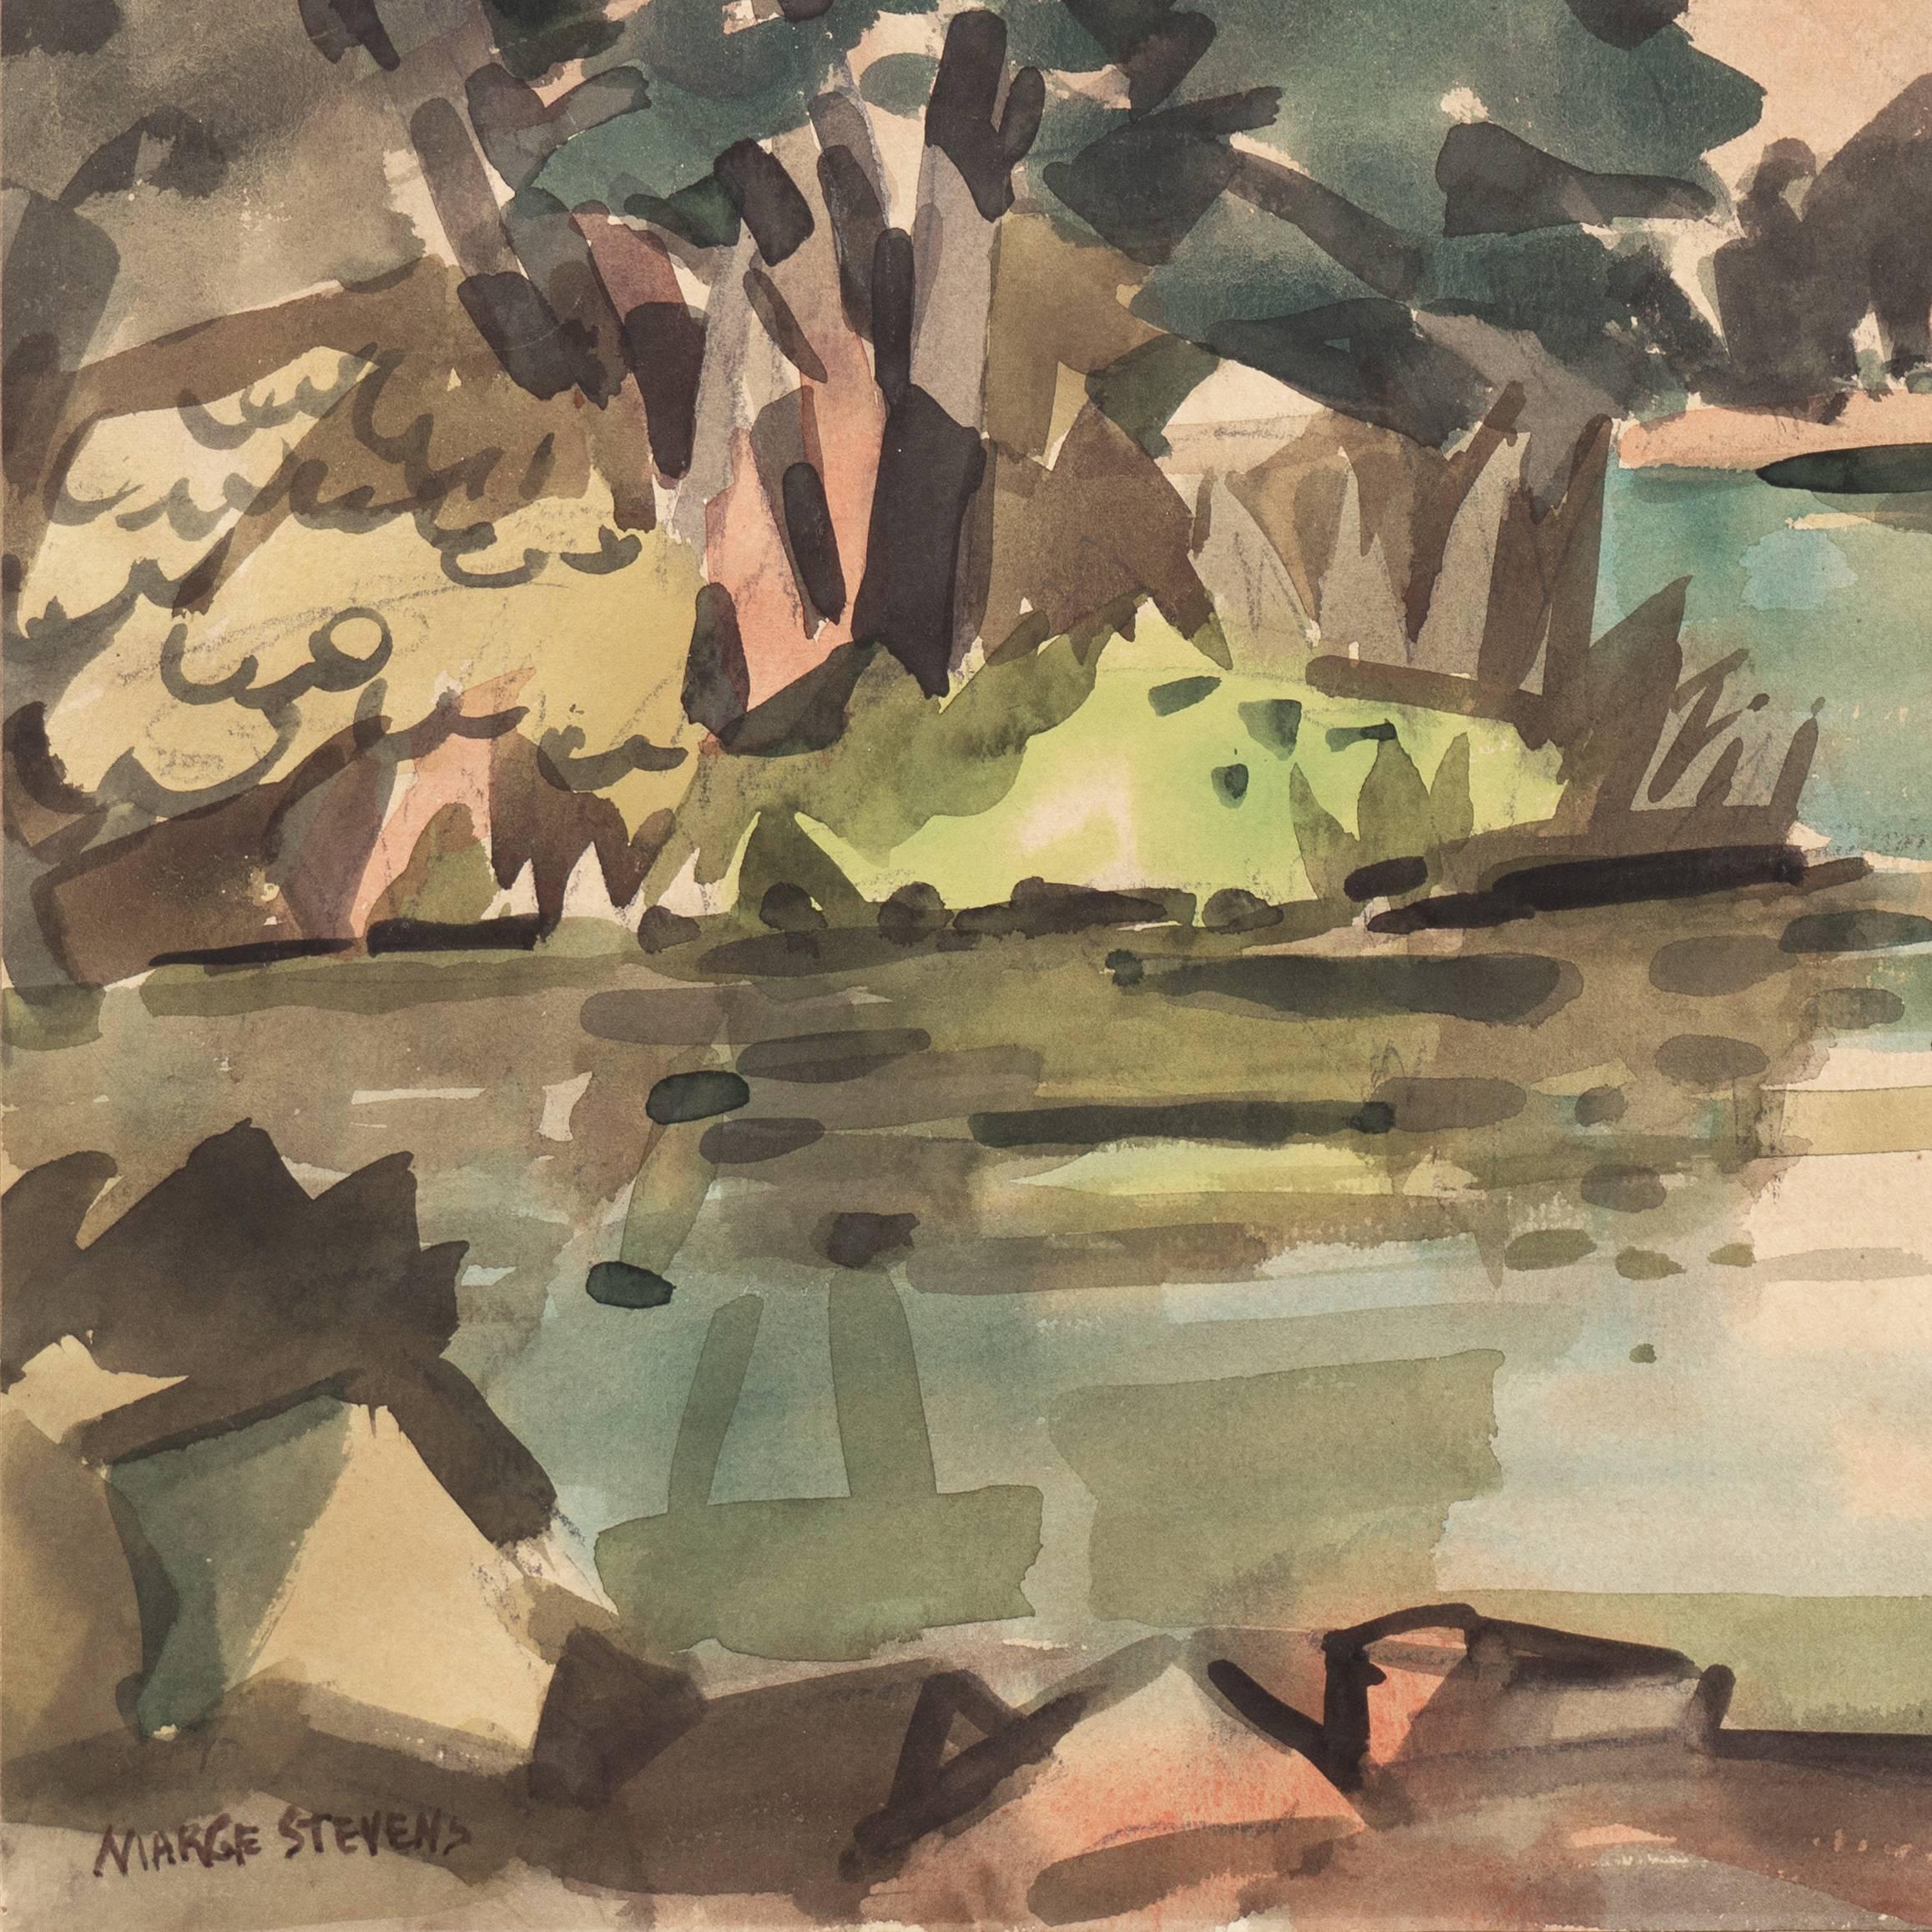 Watercolor landscape showing a view of a lake with grasses and trees growing at its edge and reflected in the water, with cloudy skies overhead.

Signed lower left, 